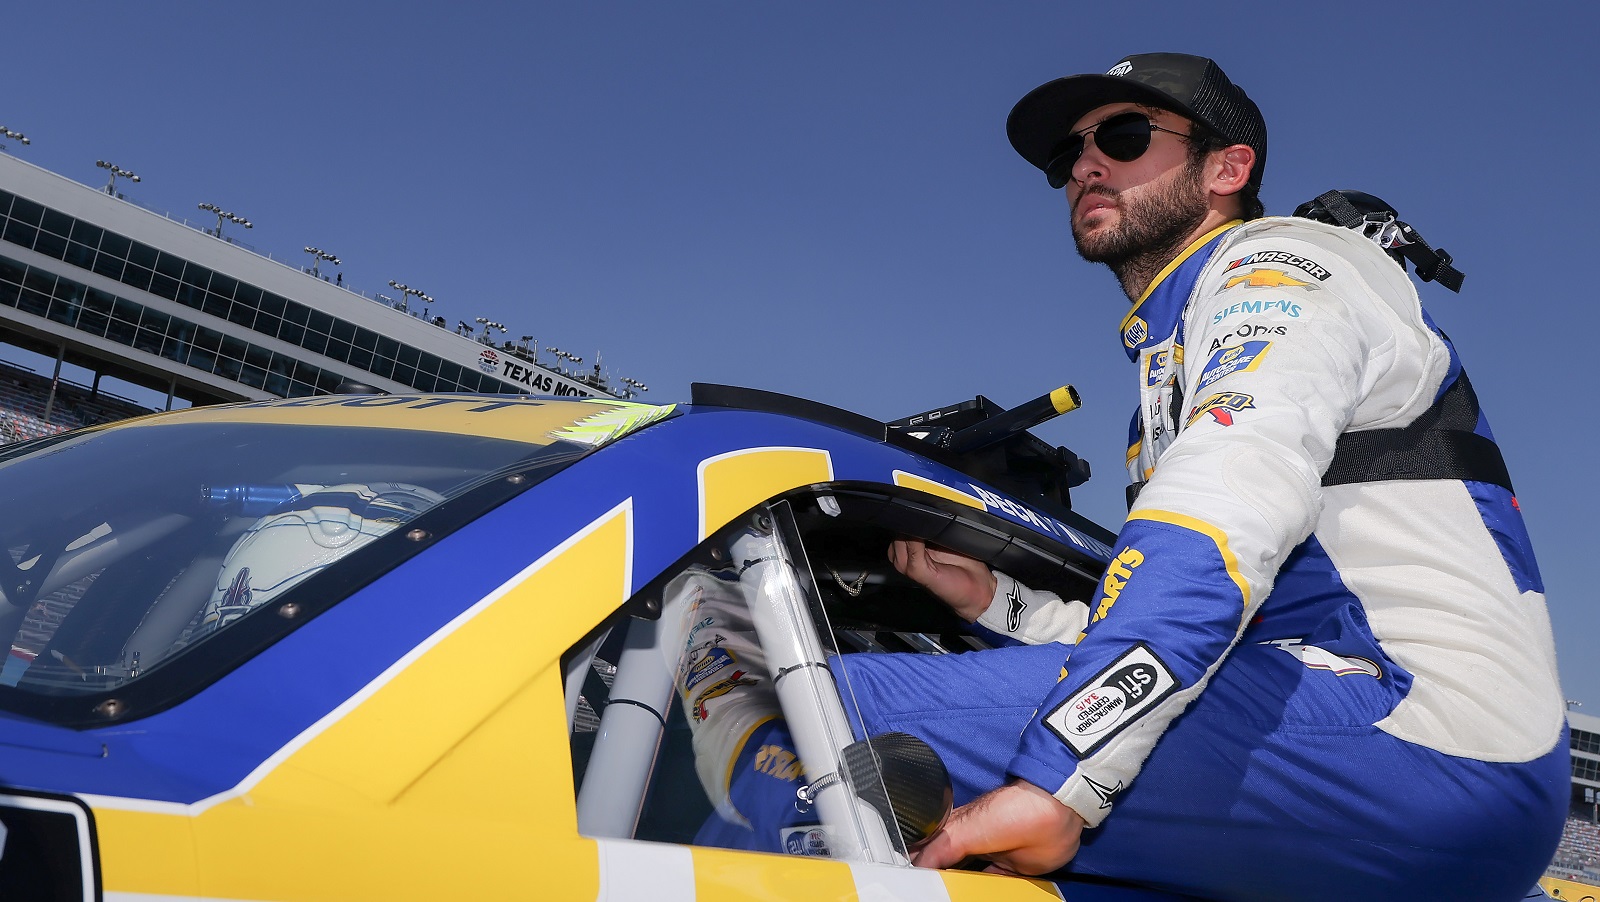 Chase Elliott enters his car during practice for the NASCAR Cup Series Auto Trader EchoPark Automotive 500 at Texas Motor Speedway on Sept. 24, 2022, in Fort Worth, Texas. | Jonathan Bachman/Getty Images